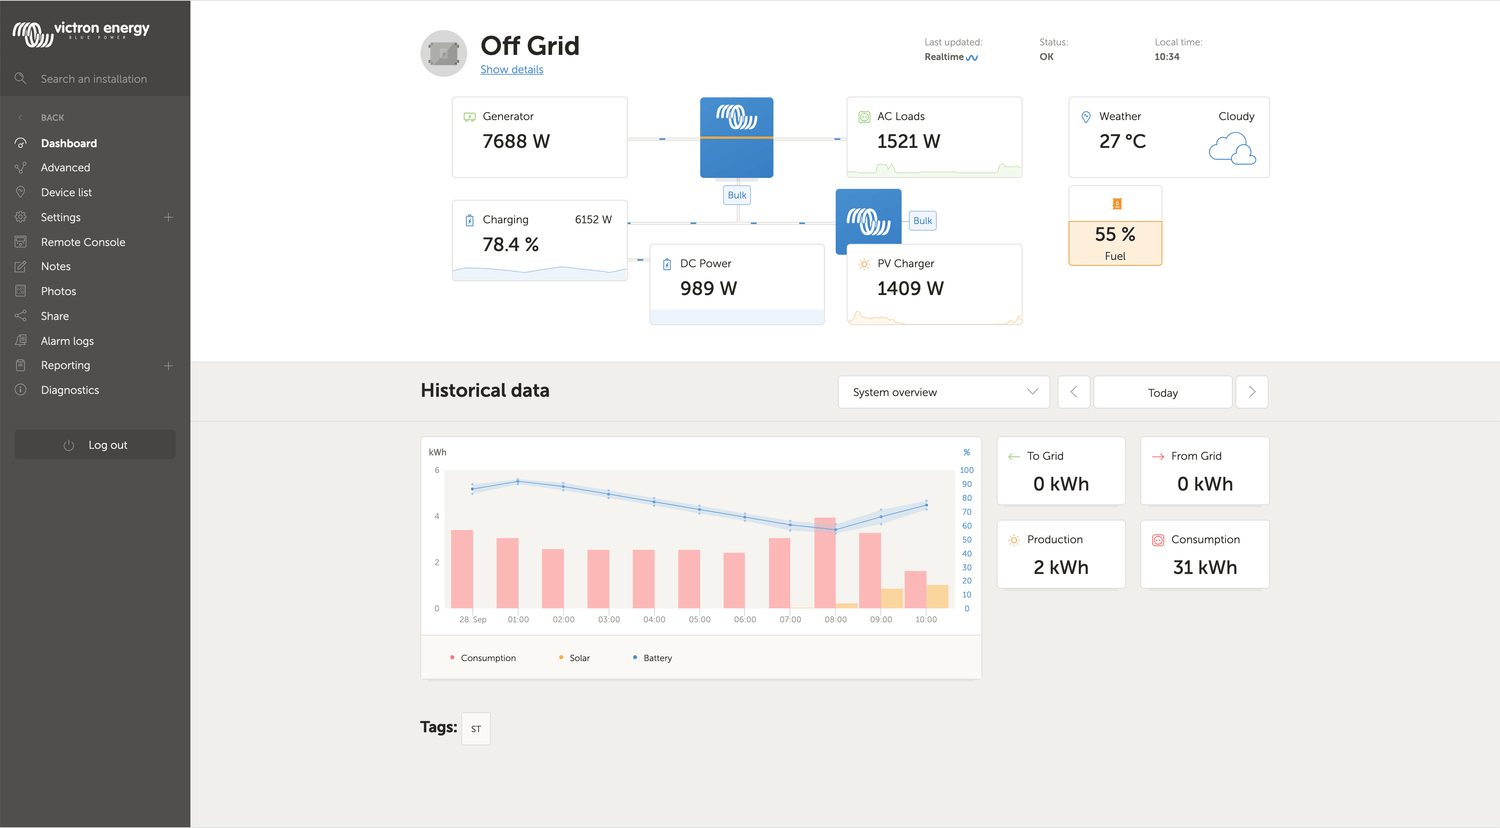 Snapshot of off-grid power system on VRM